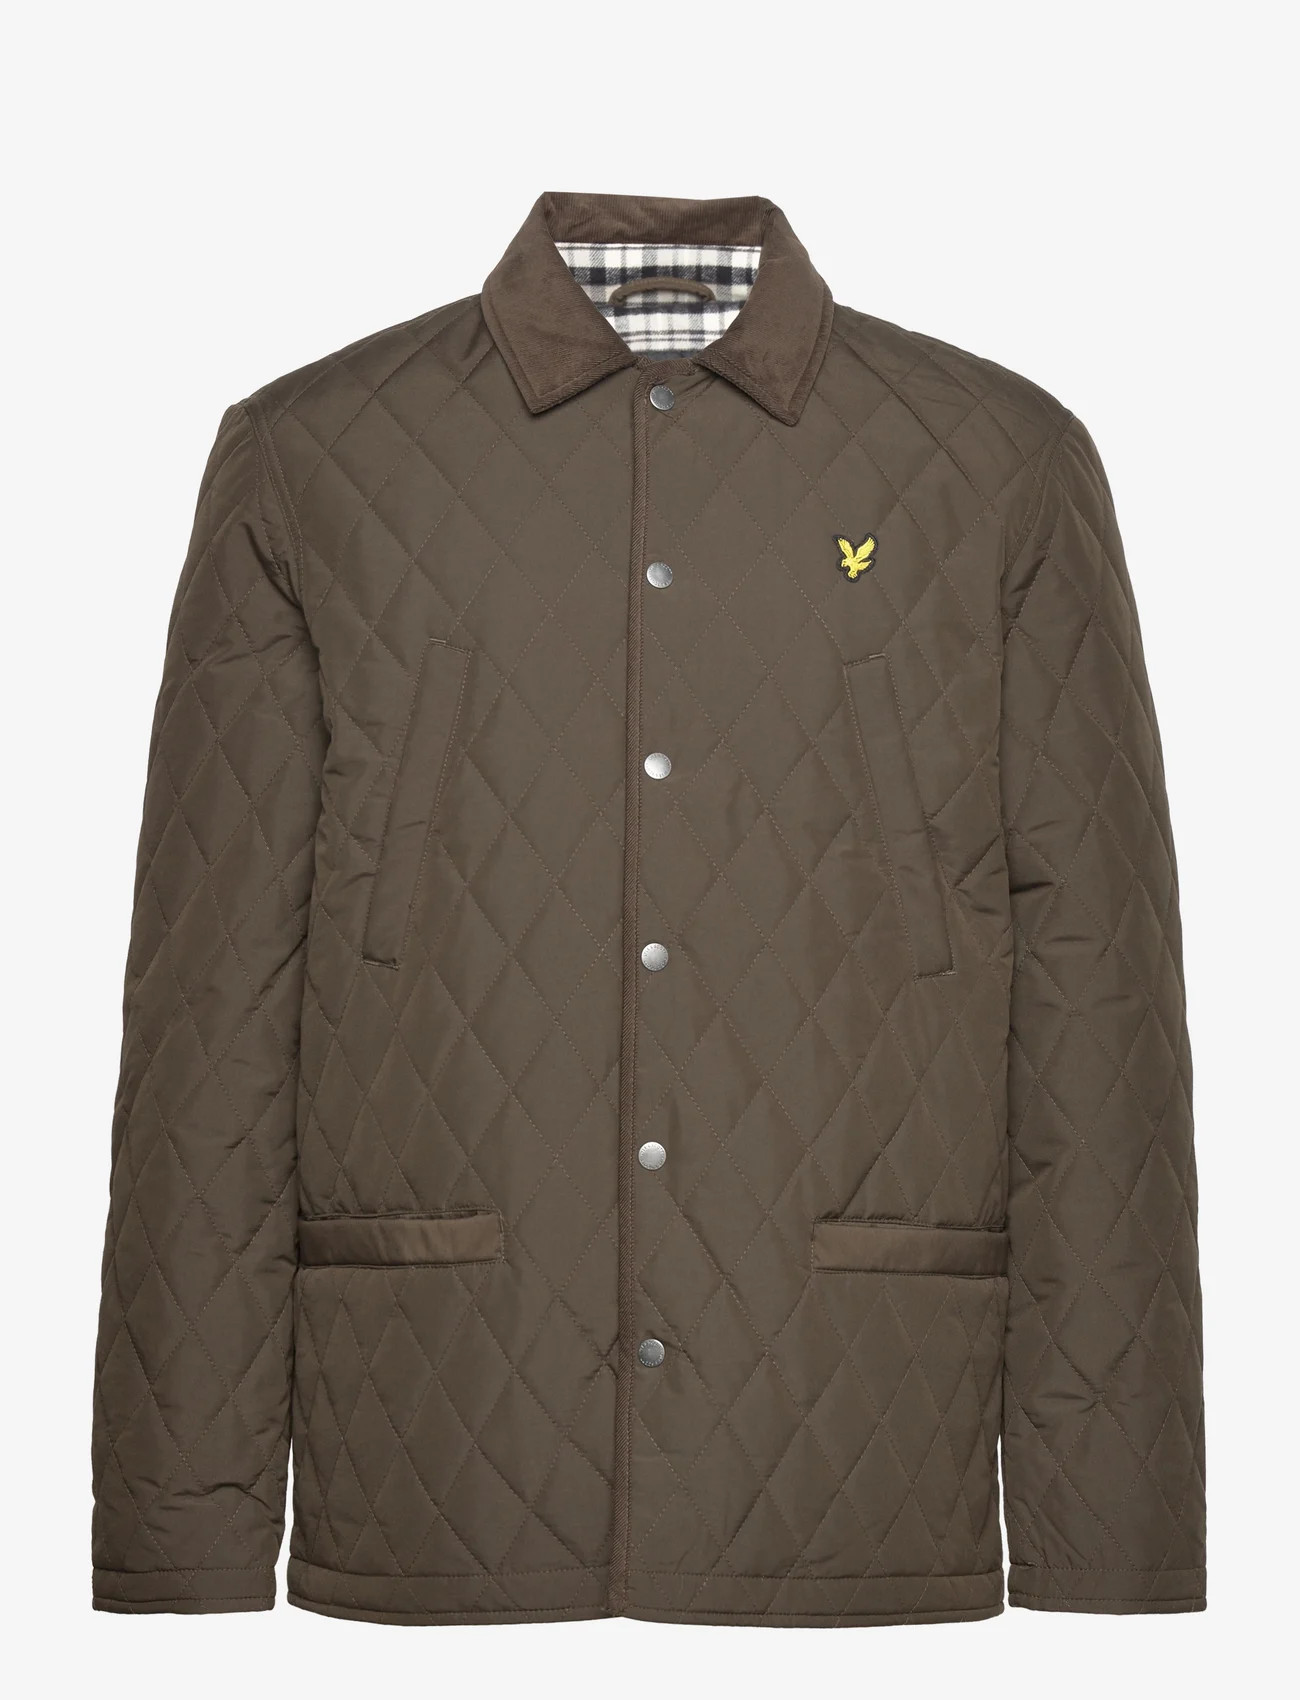 Lyle & Scott - Quilted Jacket - spring jackets - w485 olive - 0